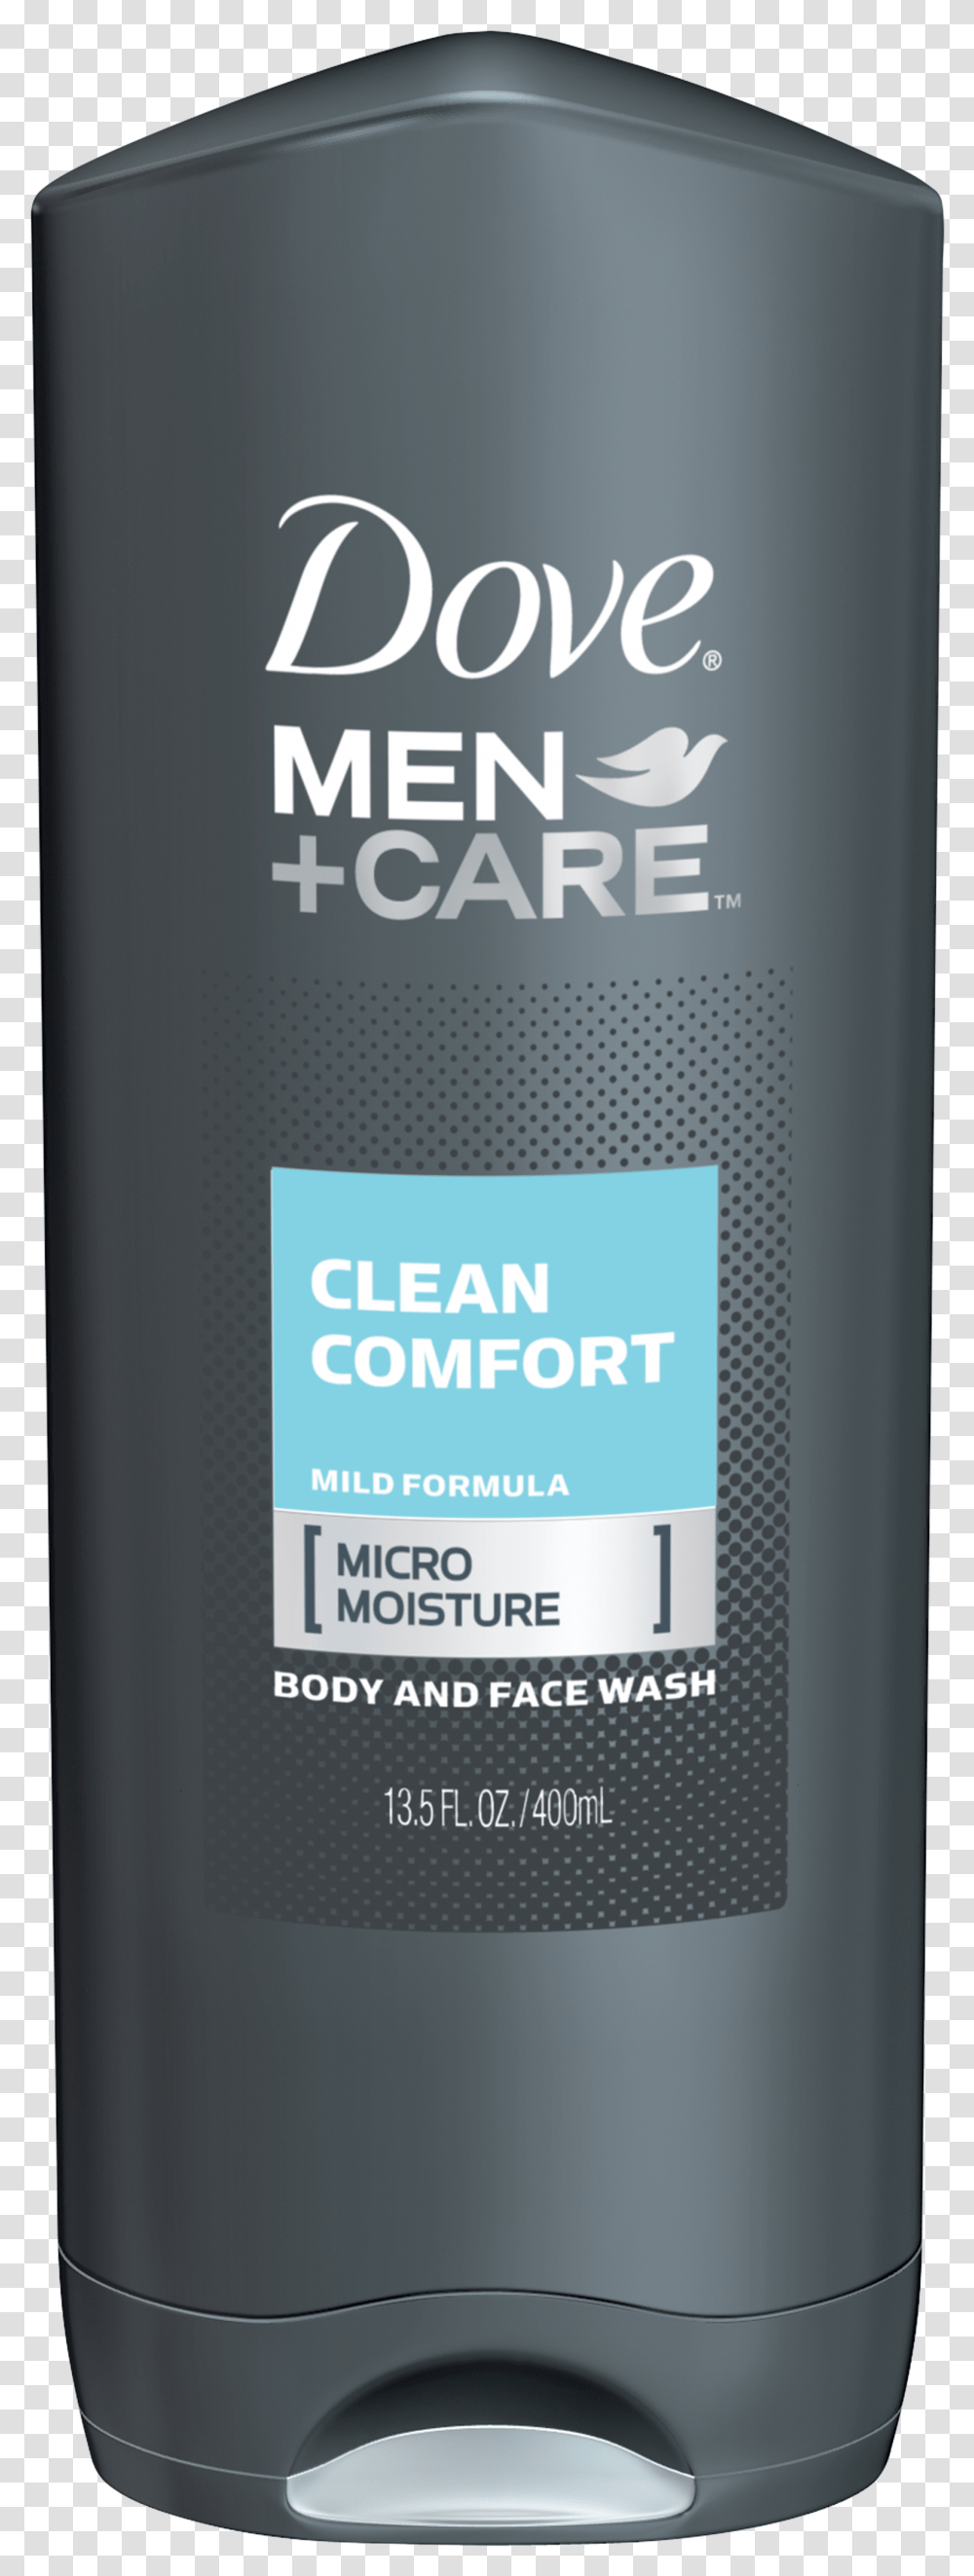 Dove Men Care Clean Comfort Body And Face Wash Dove Men Care Clean Comfort Transparent Png